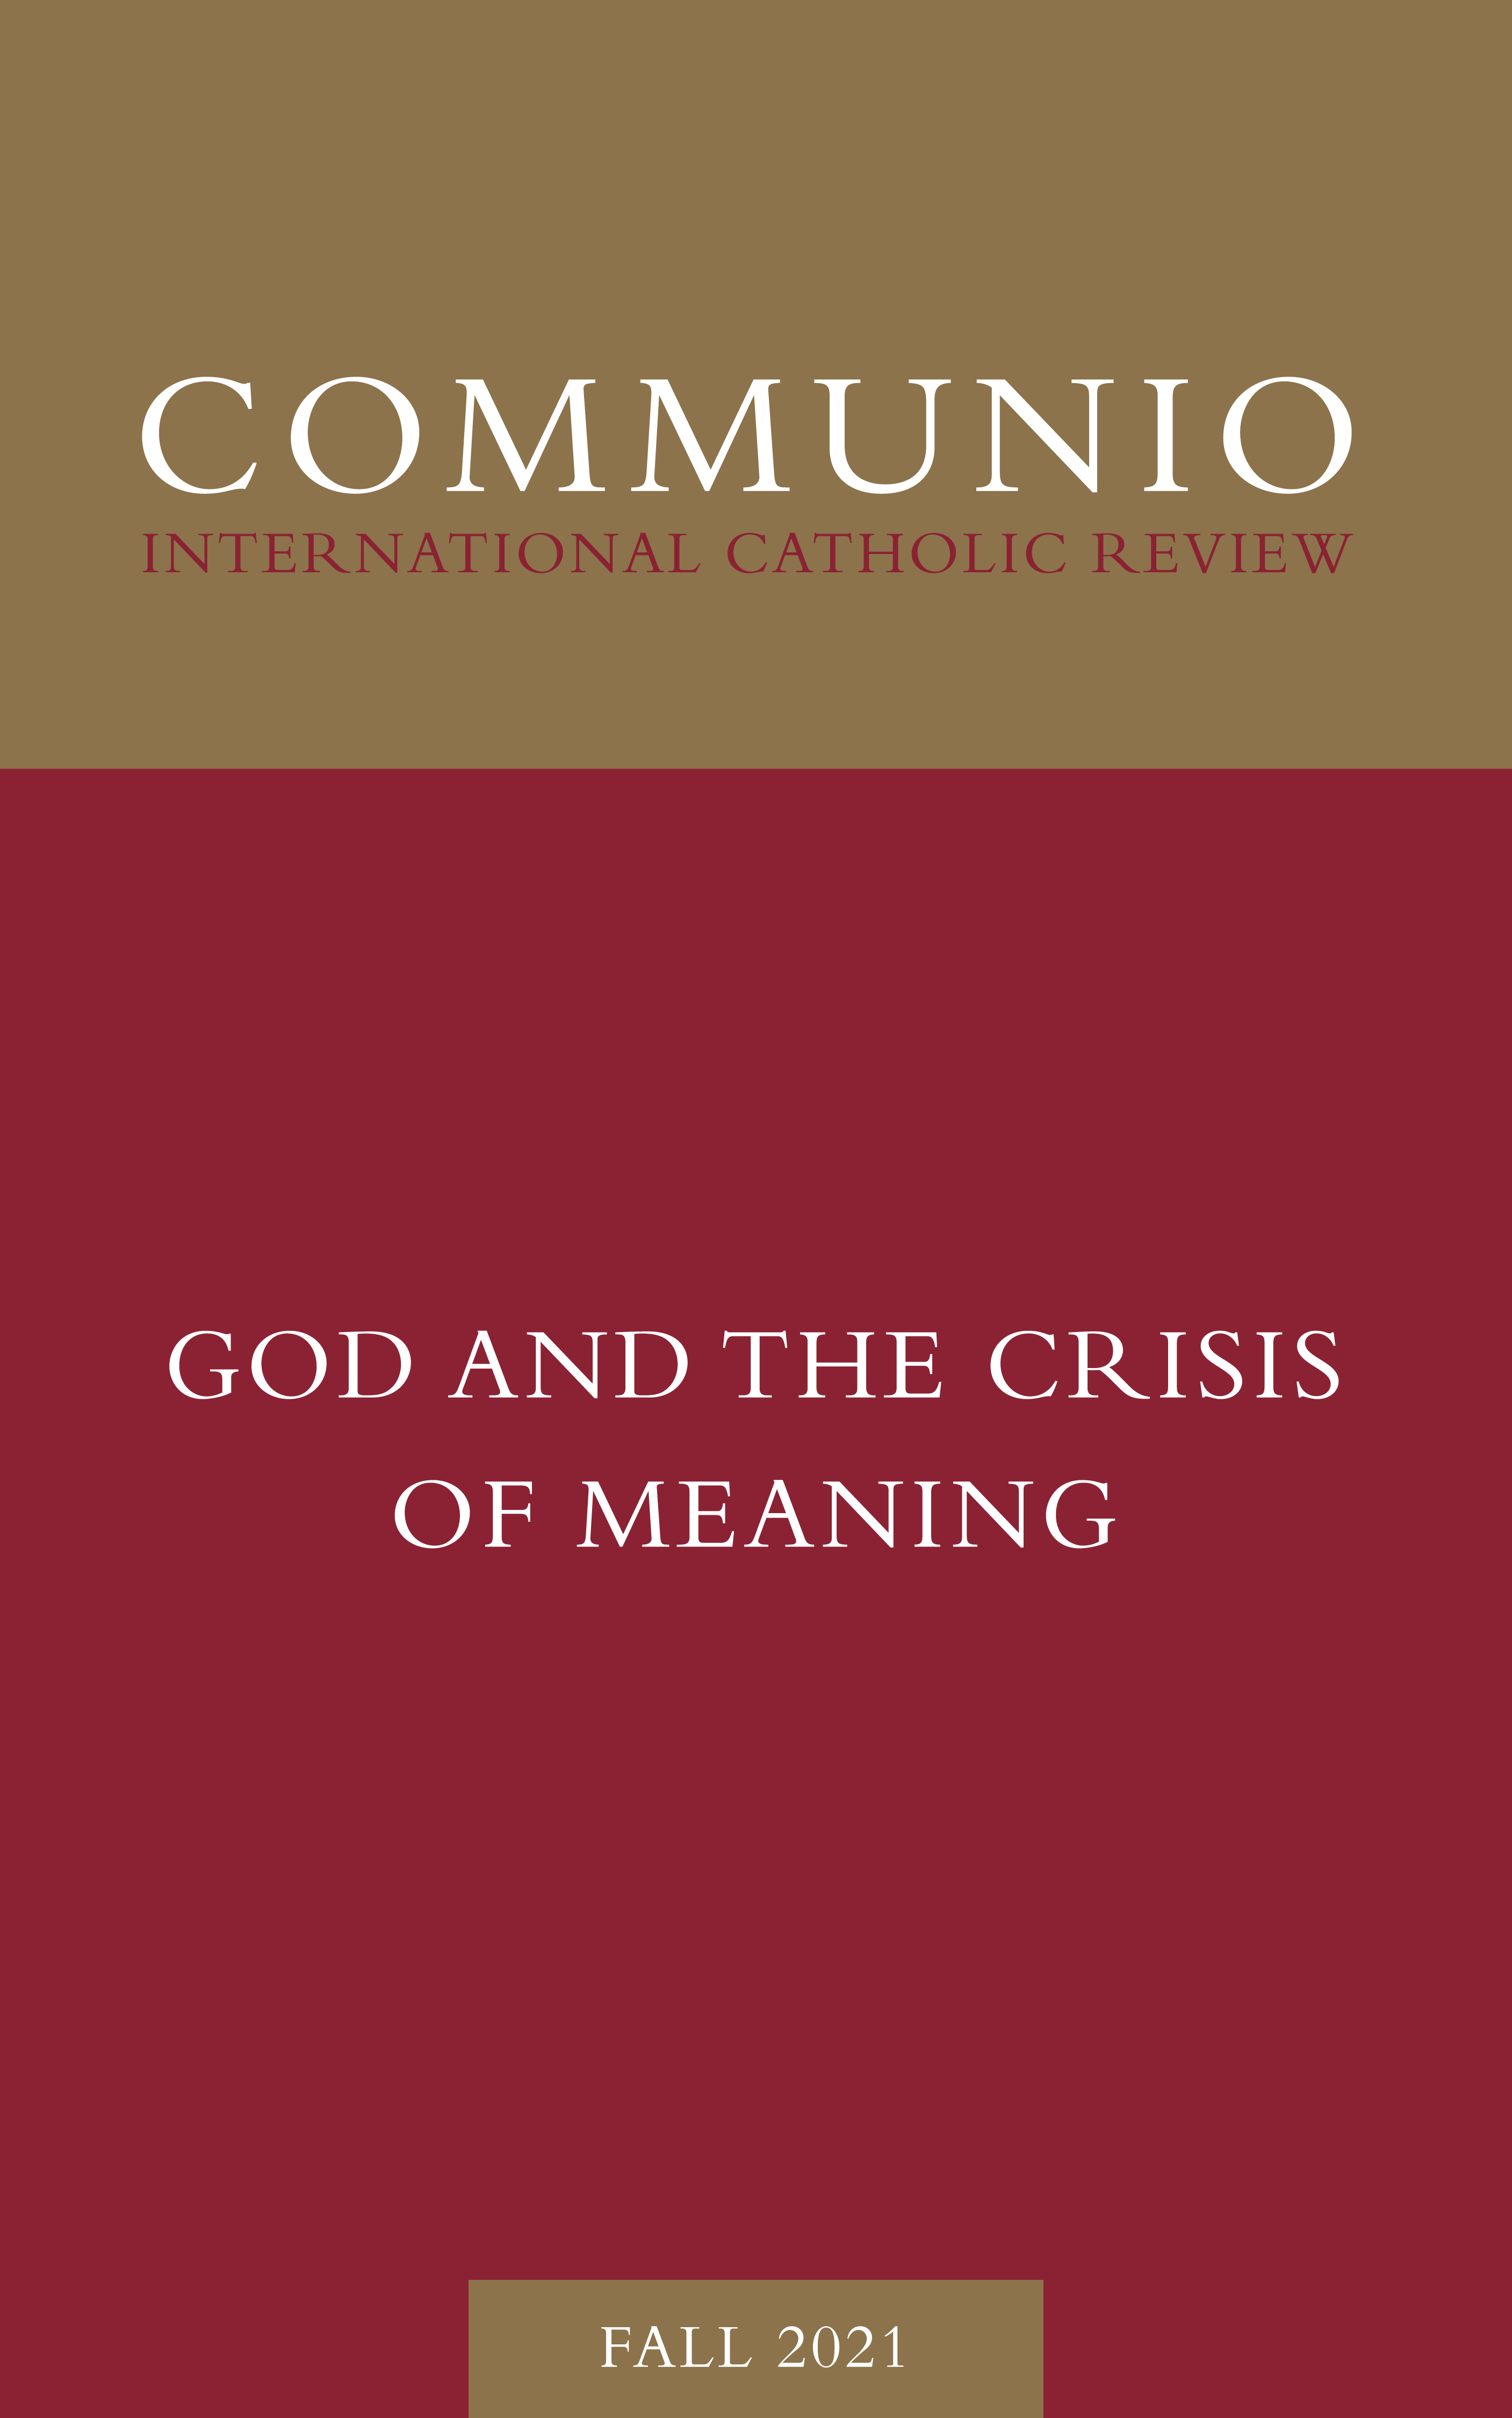 Communio - Fall 2021 - God and the Crisis of Meaning